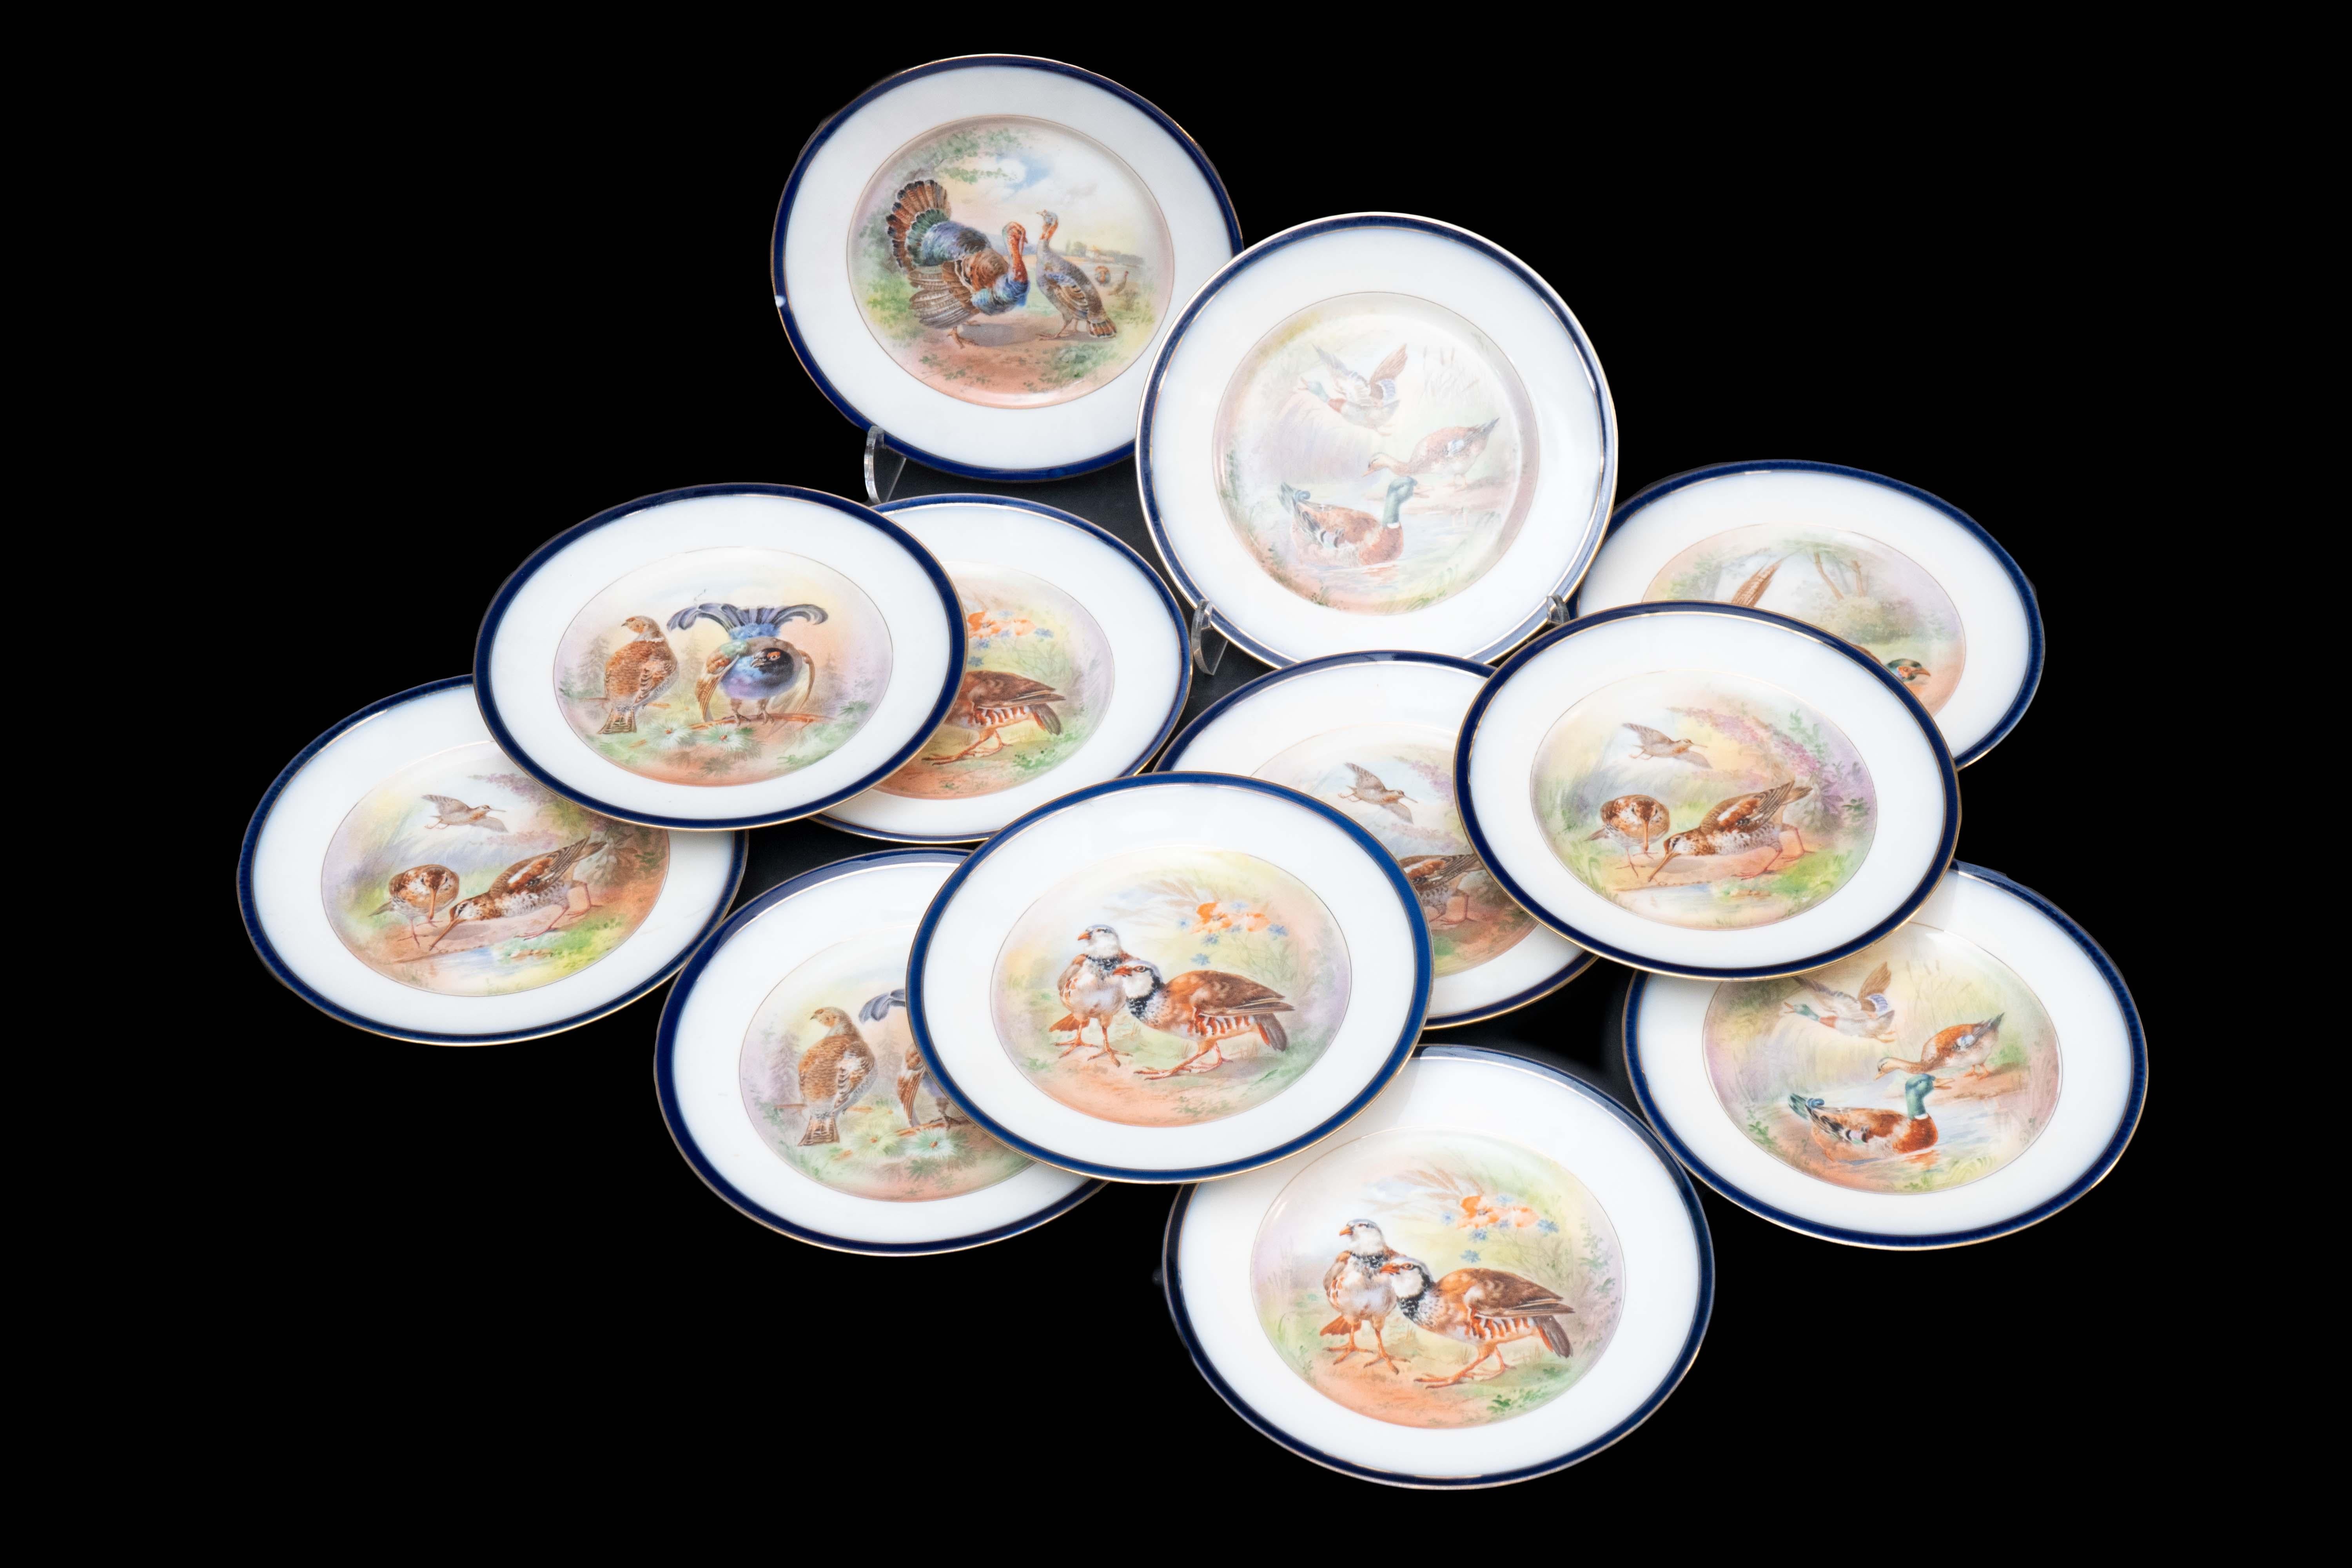 Set of Twelve Exquisite Limoges Game bird plates. Each with cobalt and gilt trim borders- marked by Limoges France.